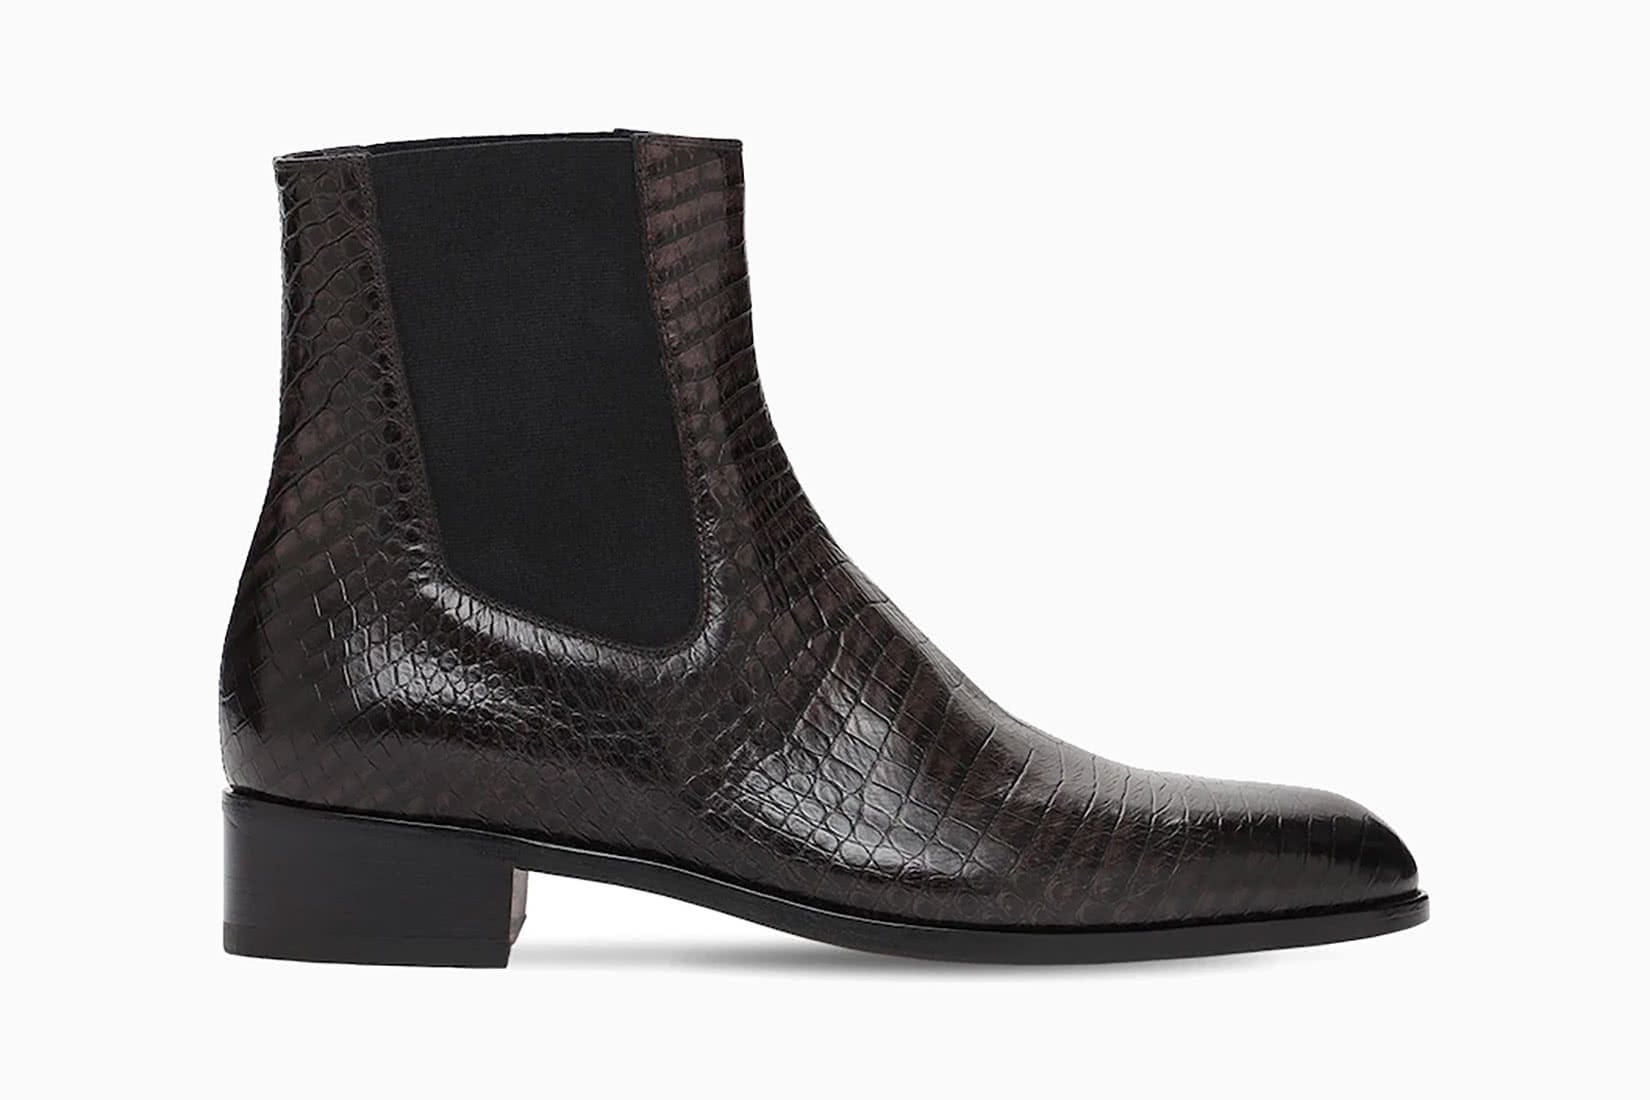 most expensive Chelsea boots men tom ford review - Luxe Digital